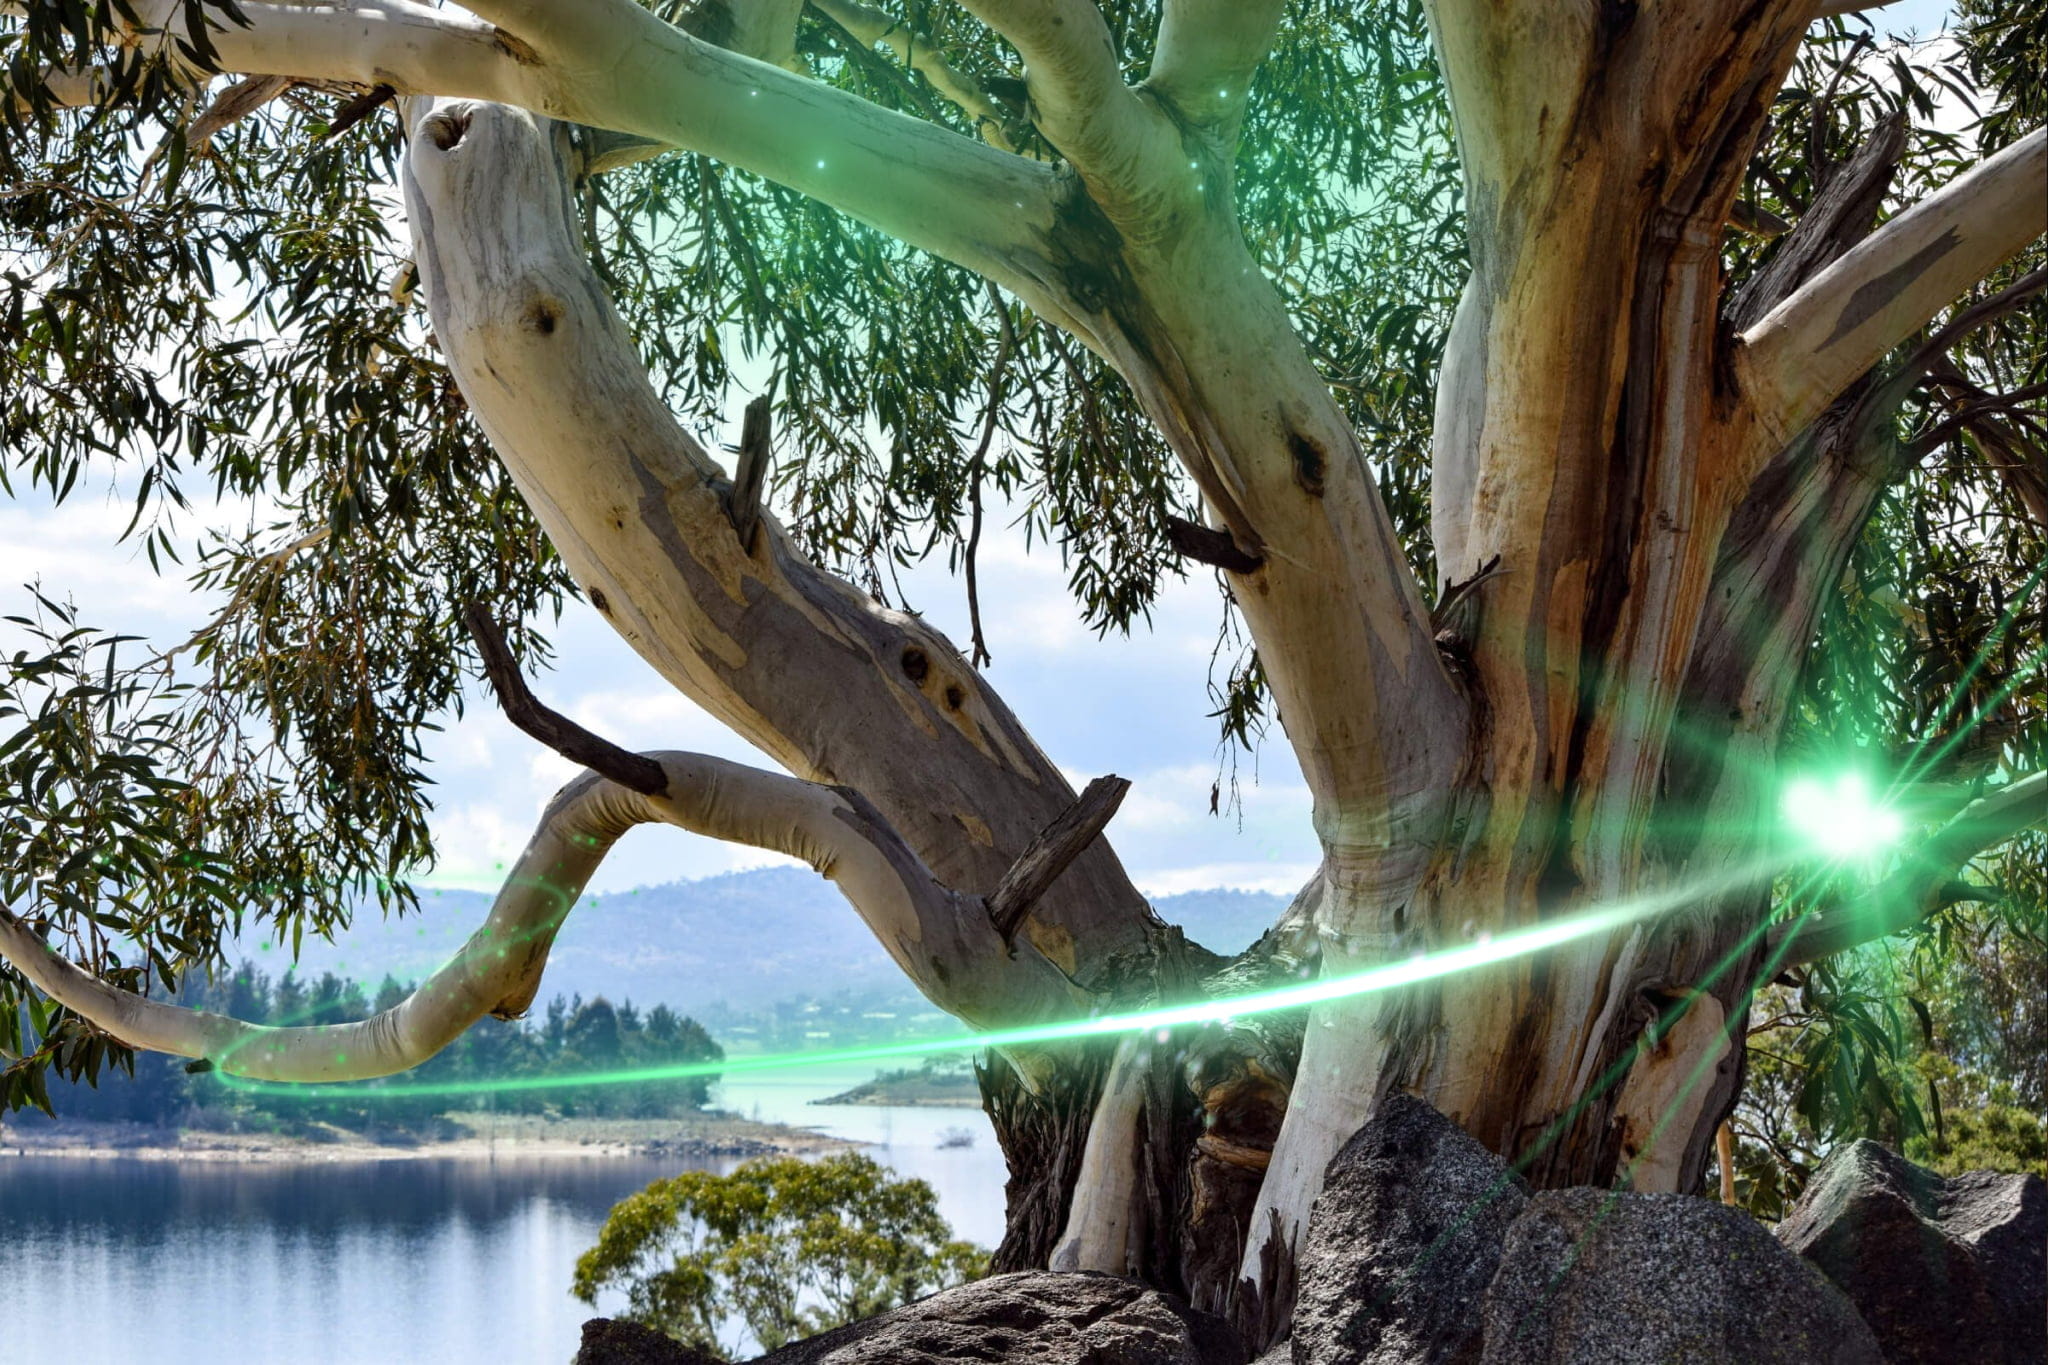 Landscape photograph featuring a gum tree located near lake